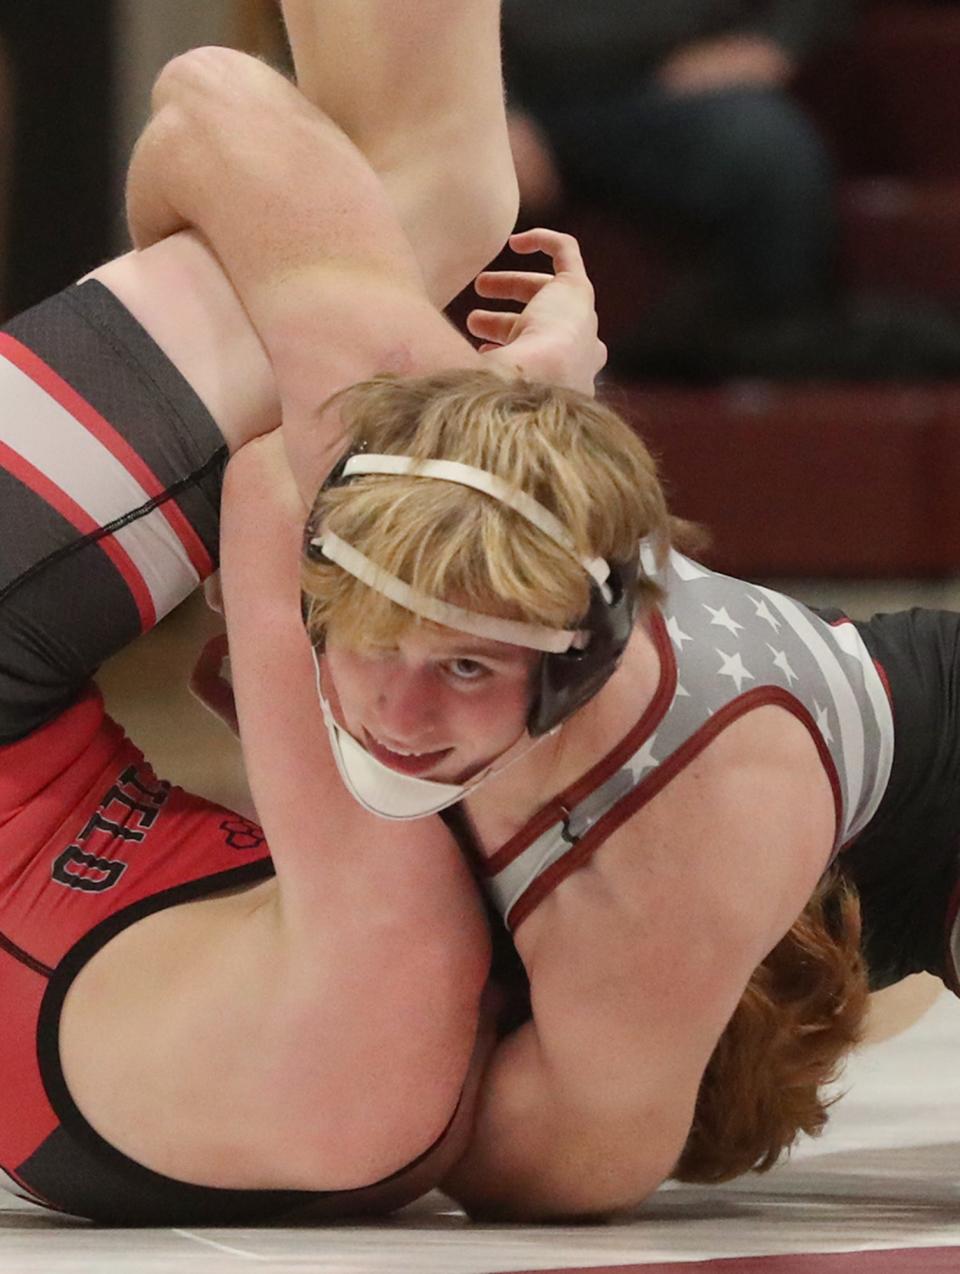 Woodridge's David Thompson looks up as he pins Springfield's Kam Wilkinson in their 132-pound match Thursday. [Mike Cardew/Beacon Journal]